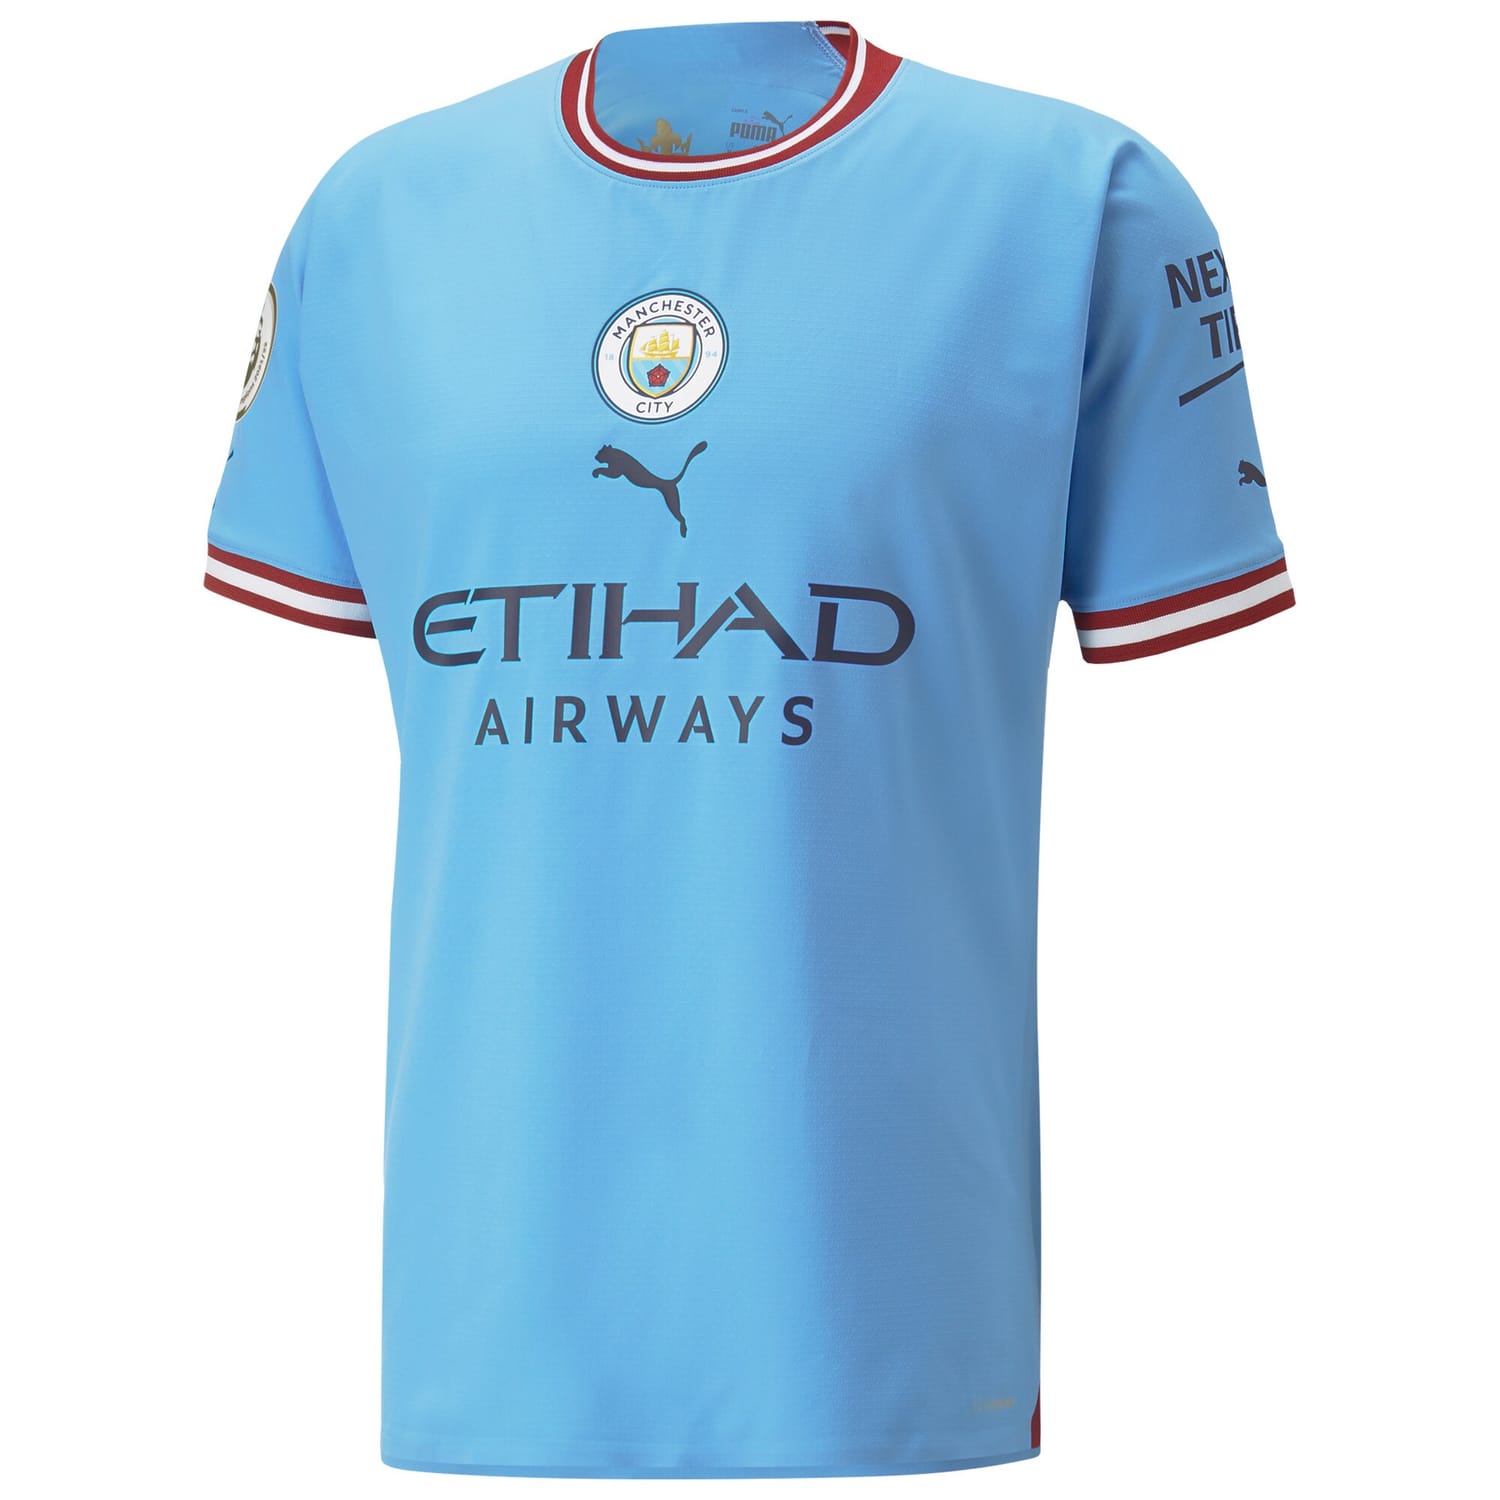 Premier League Manchester City Home Authentic Jersey Shirt Light Blue 2022-23 player Joao Cancelo printing for Men